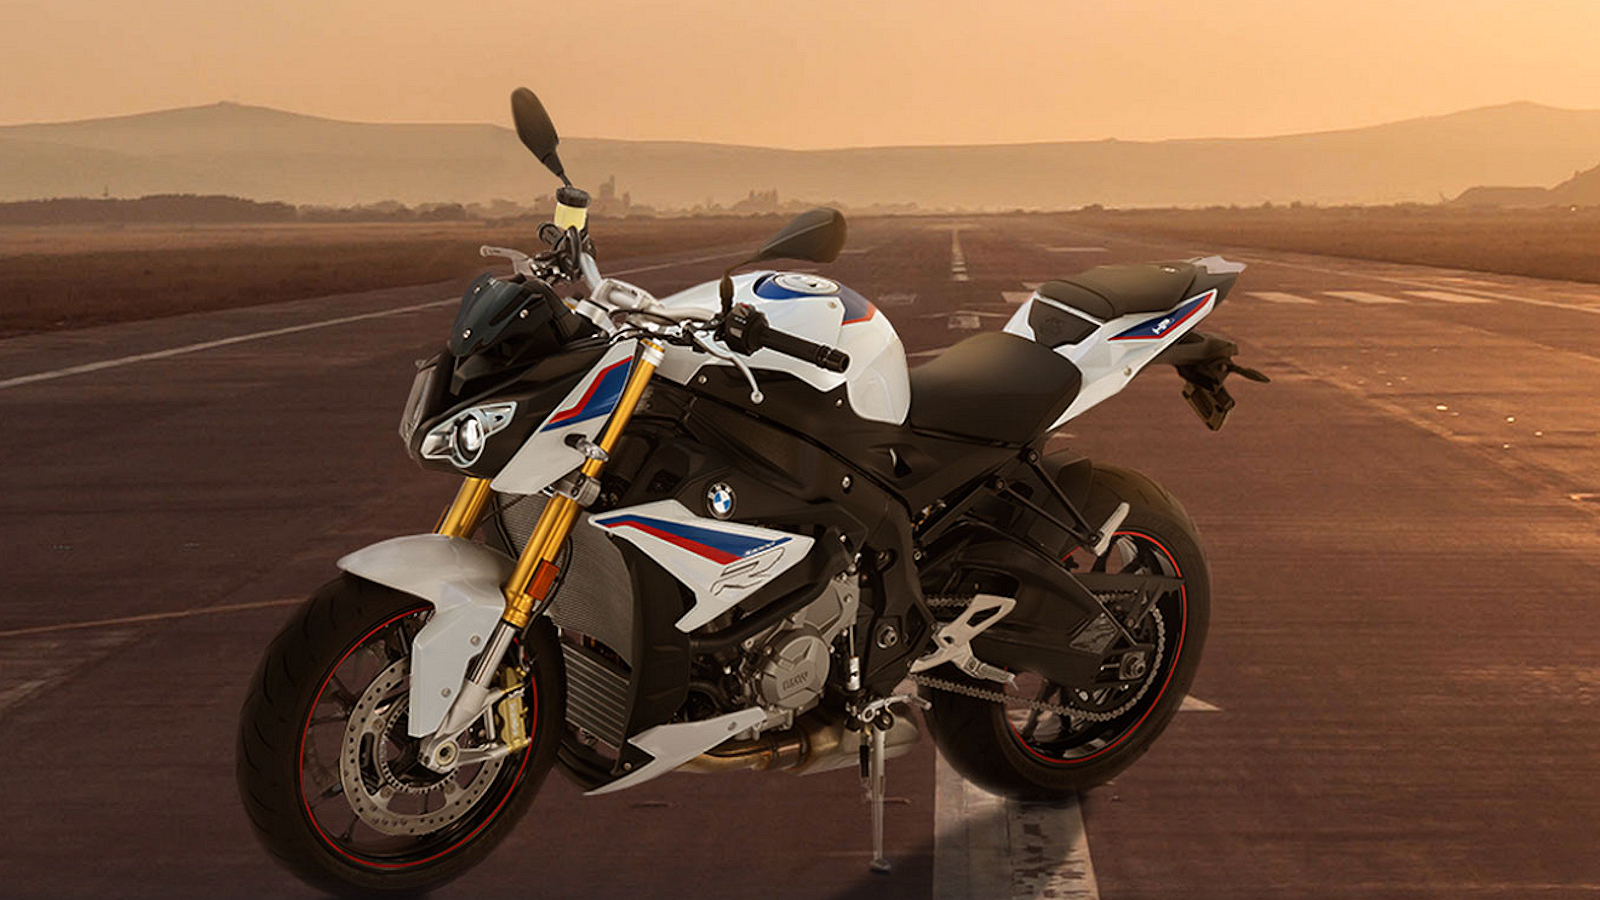 2019 Bmw S 1000 R Pictures, Photos, Wallpapers - Bmw S1000r 2019 , HD Wallpaper & Backgrounds